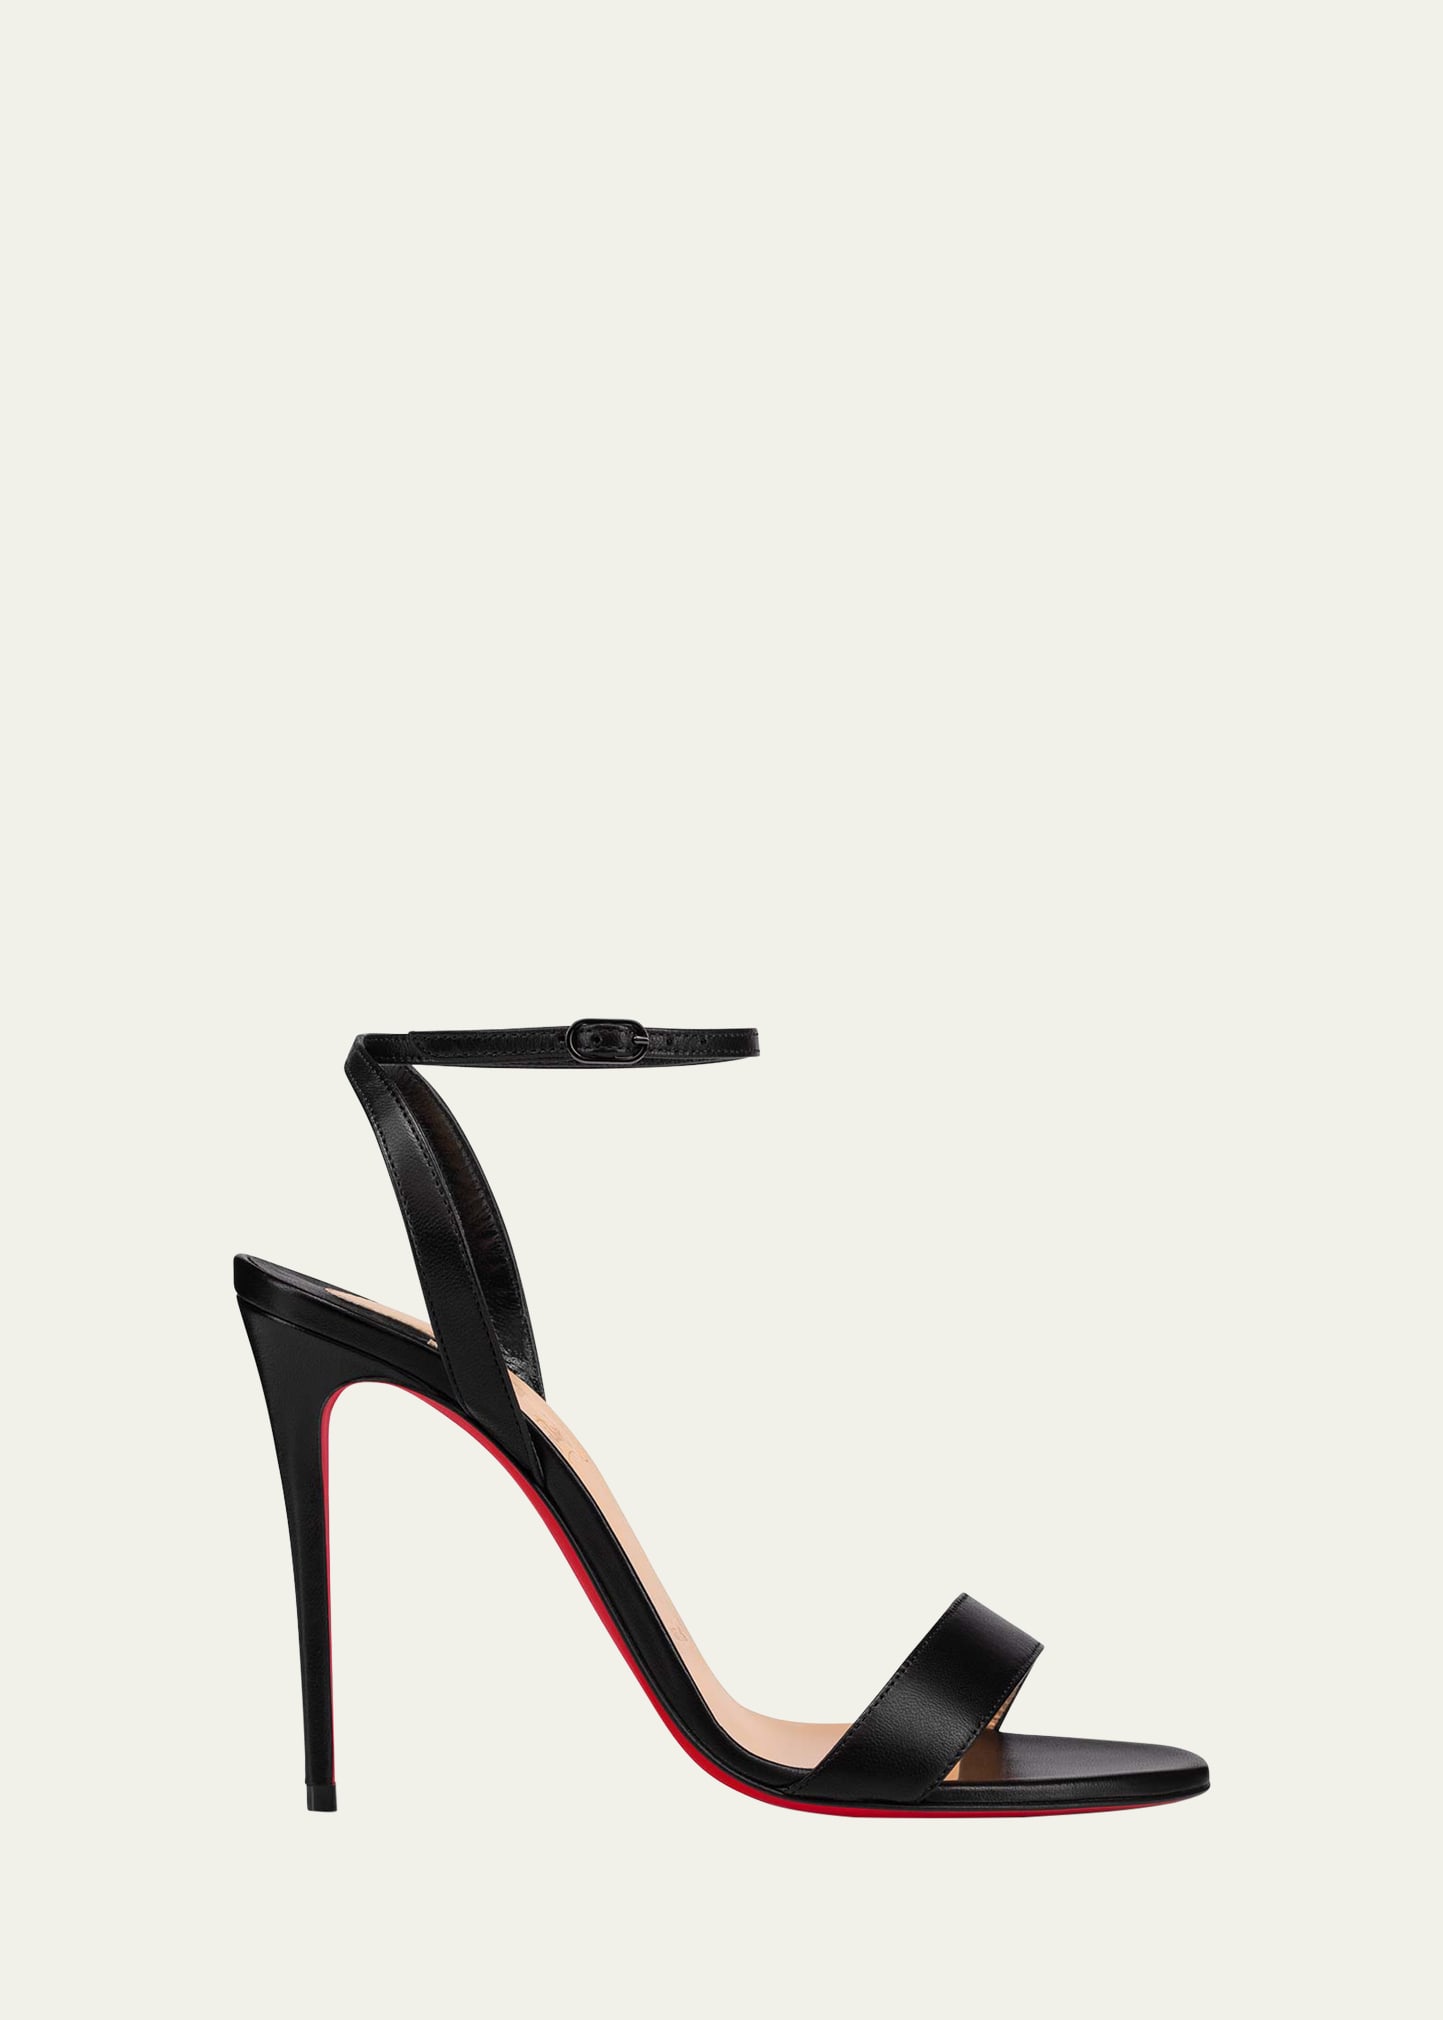 Christian Louboutin Just Nothing Illusion Sandals